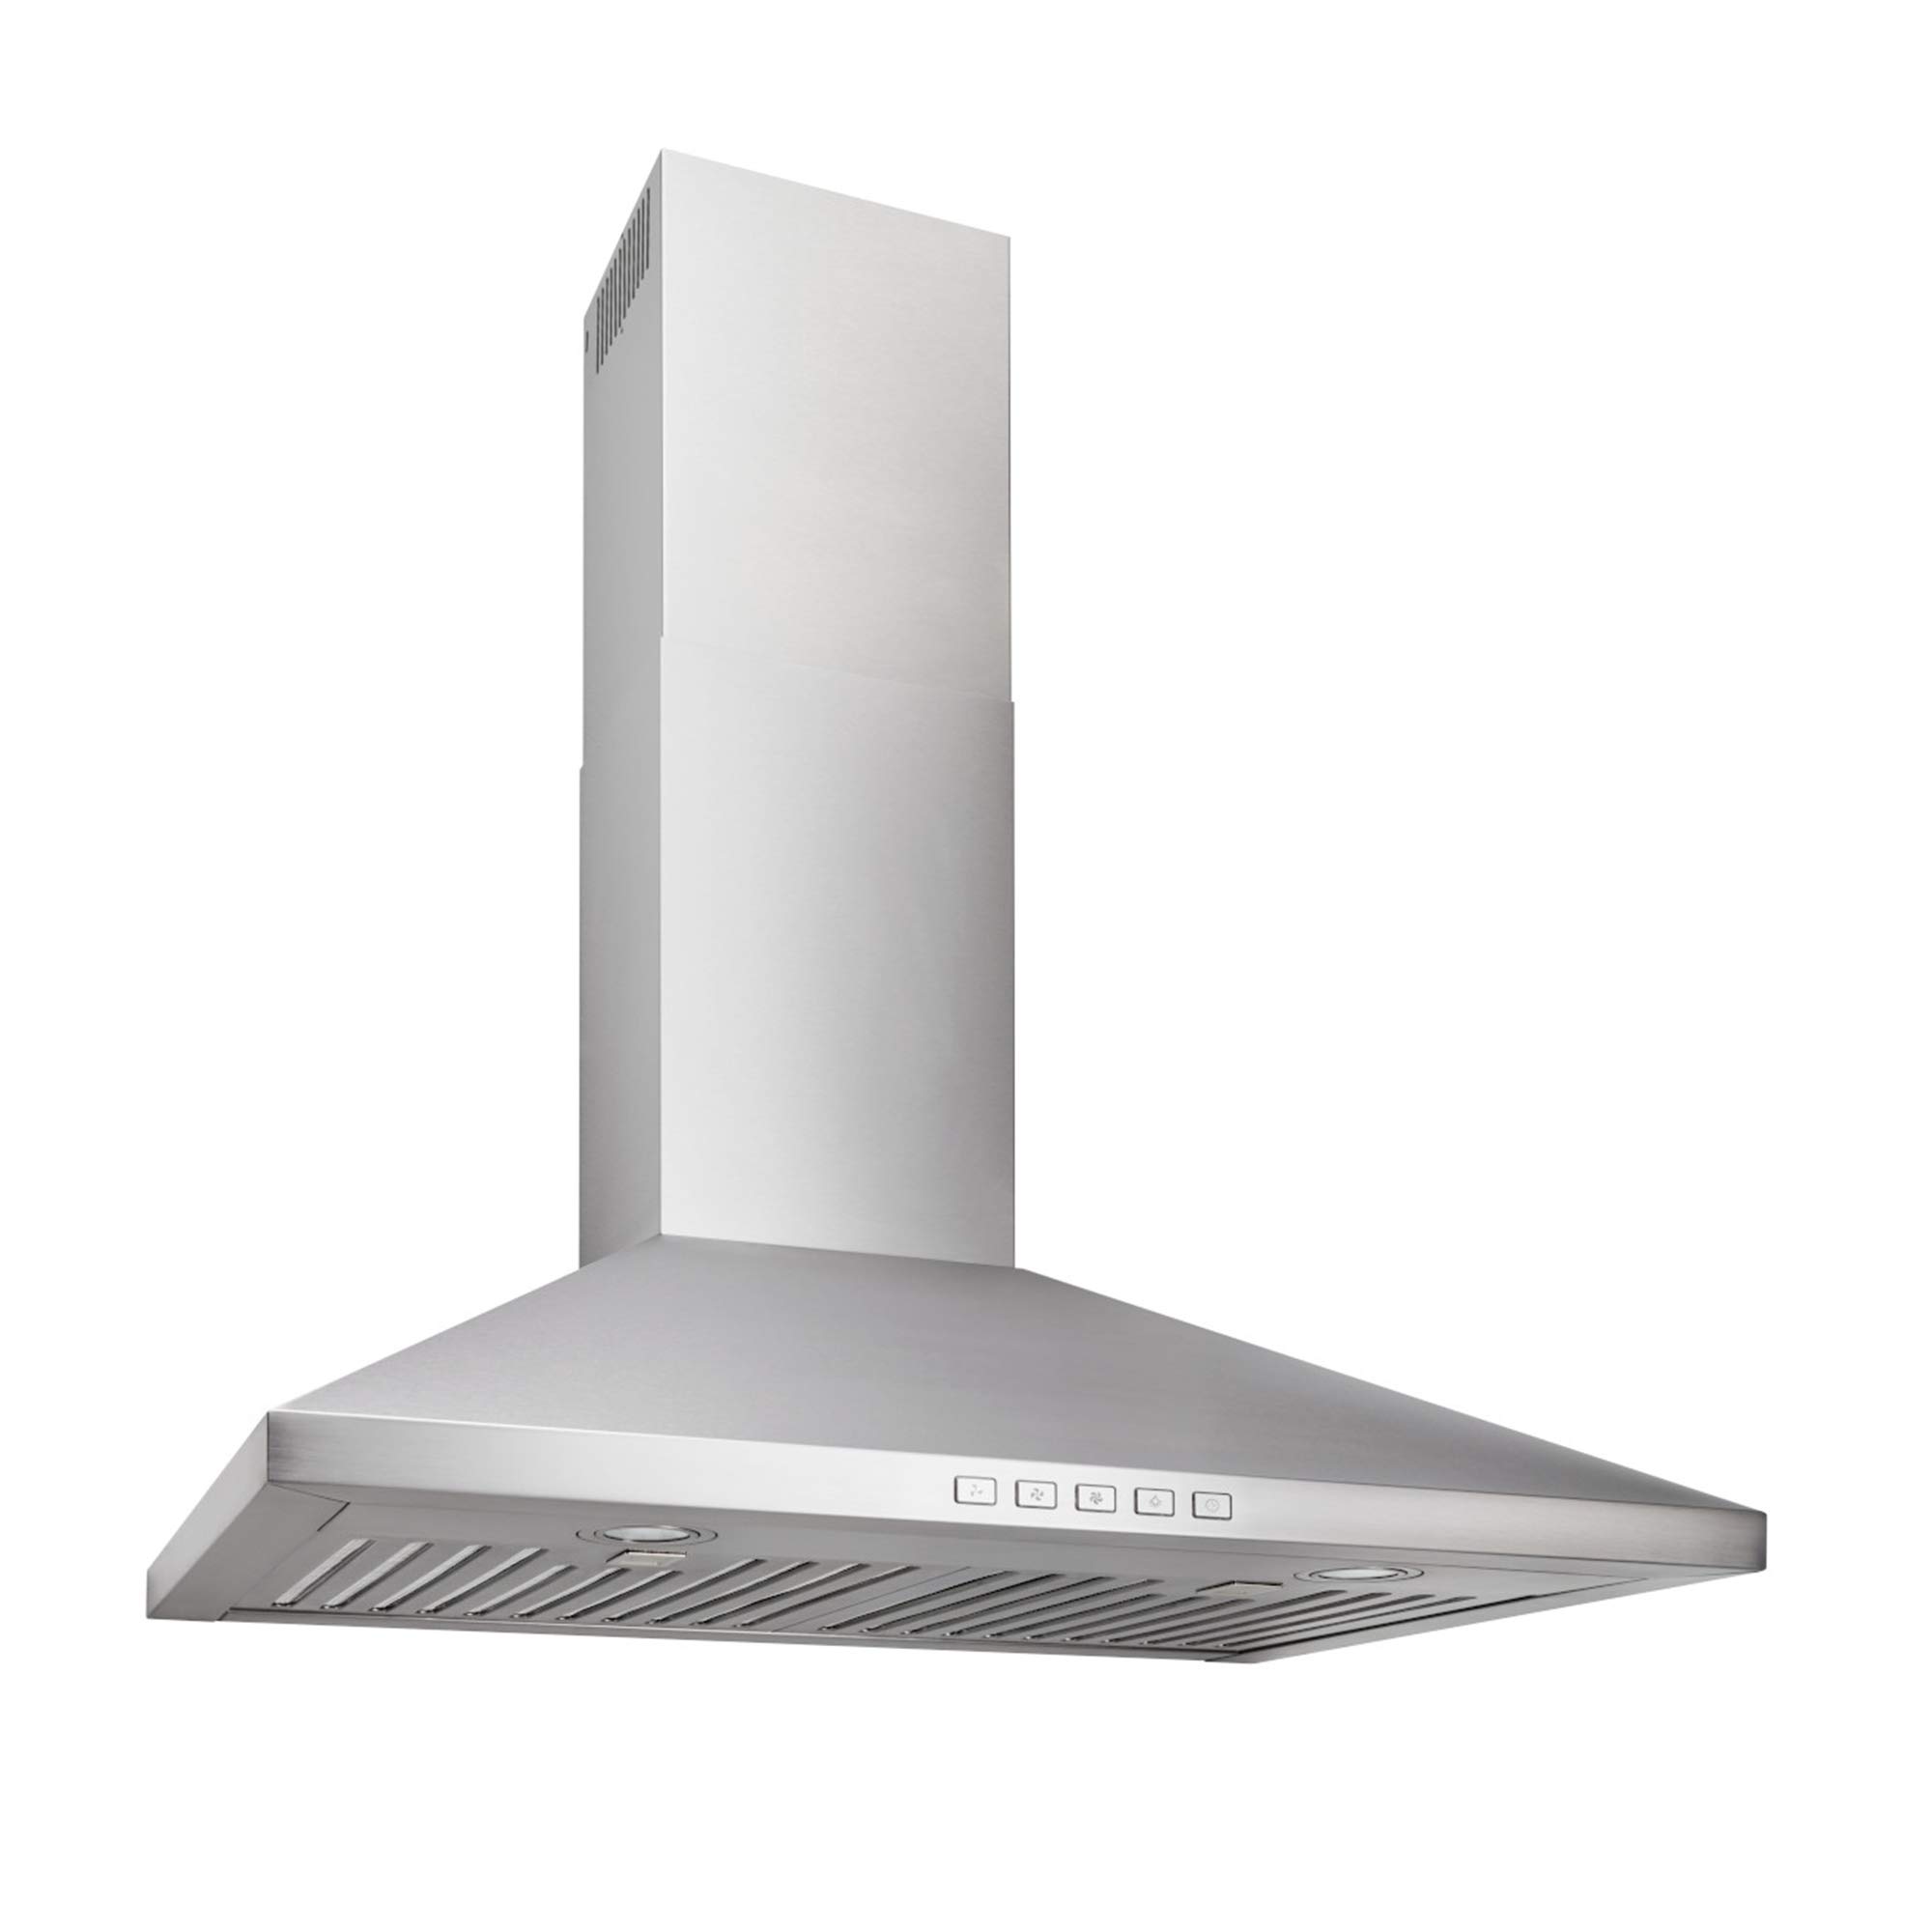 Broan-NuTone BWP2244SS 24-inch Wall-Mount convertible chimney-Style Pyramidal Range Hood with 3-Speed Exhaust Fan and Light, Sta